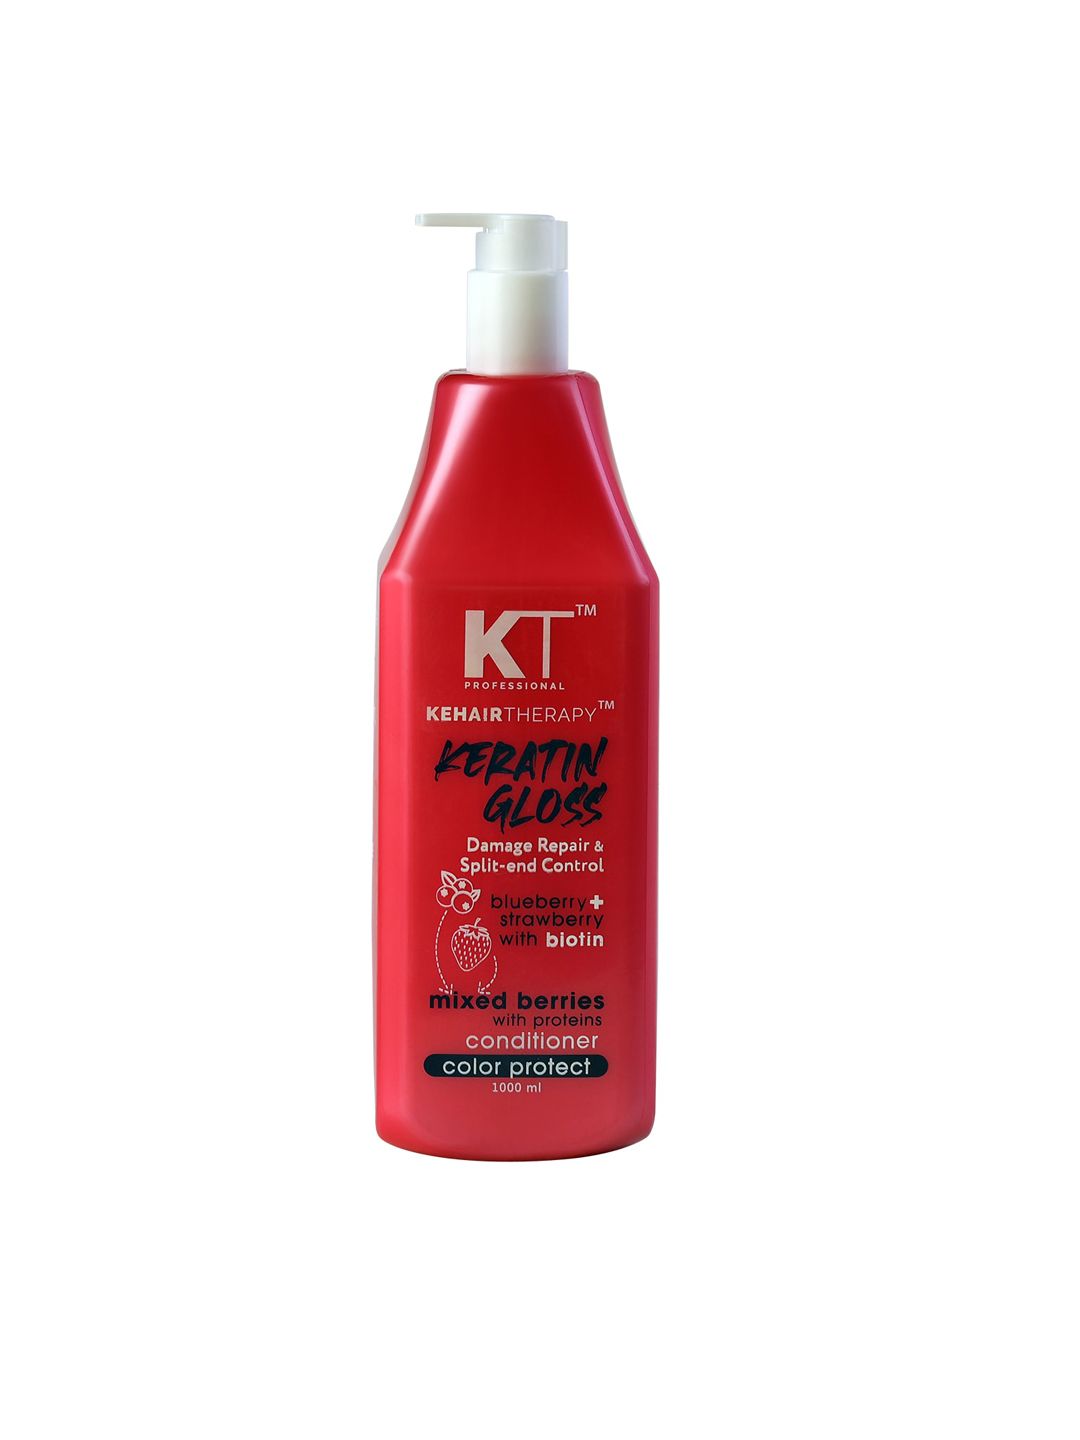 KEHAIRTHERAPY Professional Keratin Gloss Damage Repair Color Protect Conditioner- 1000ml Price in India